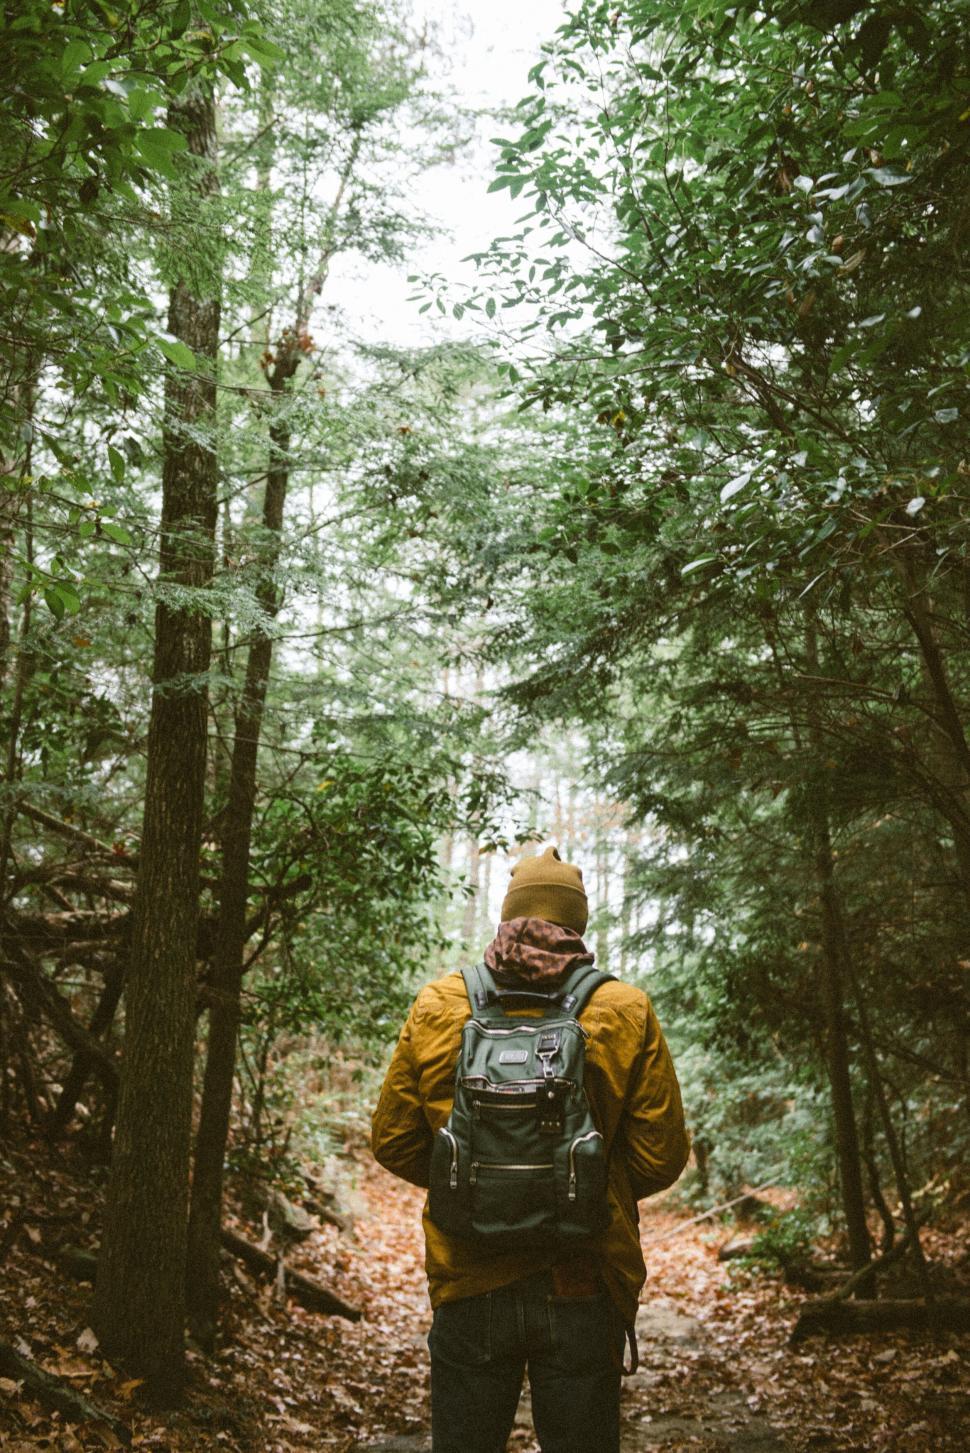 Free Image of Explorer in the forest looking away 